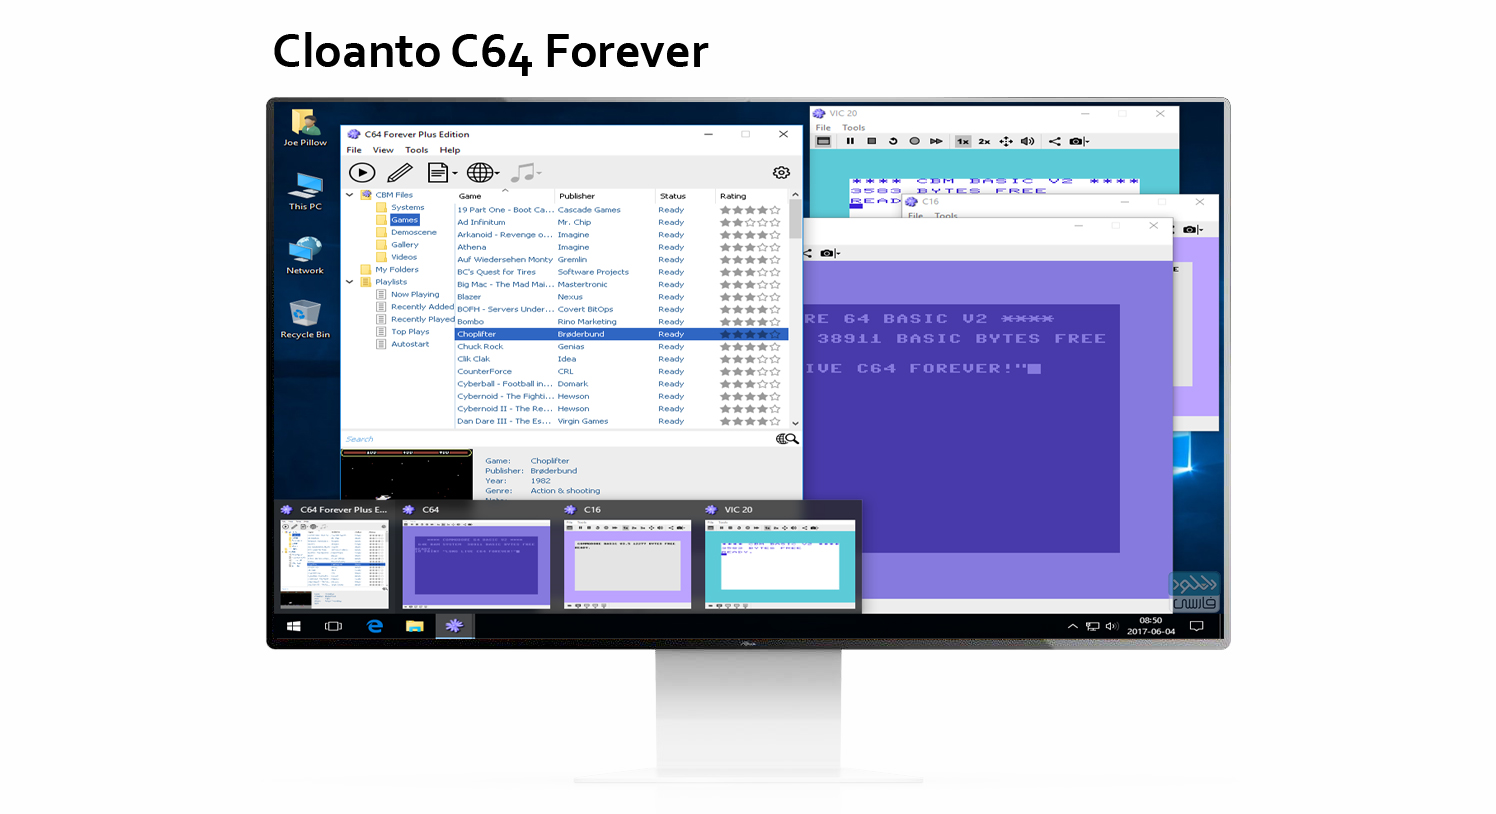 download the last version for ipod Cloanto C64 Forever Plus Edition 10.2.8